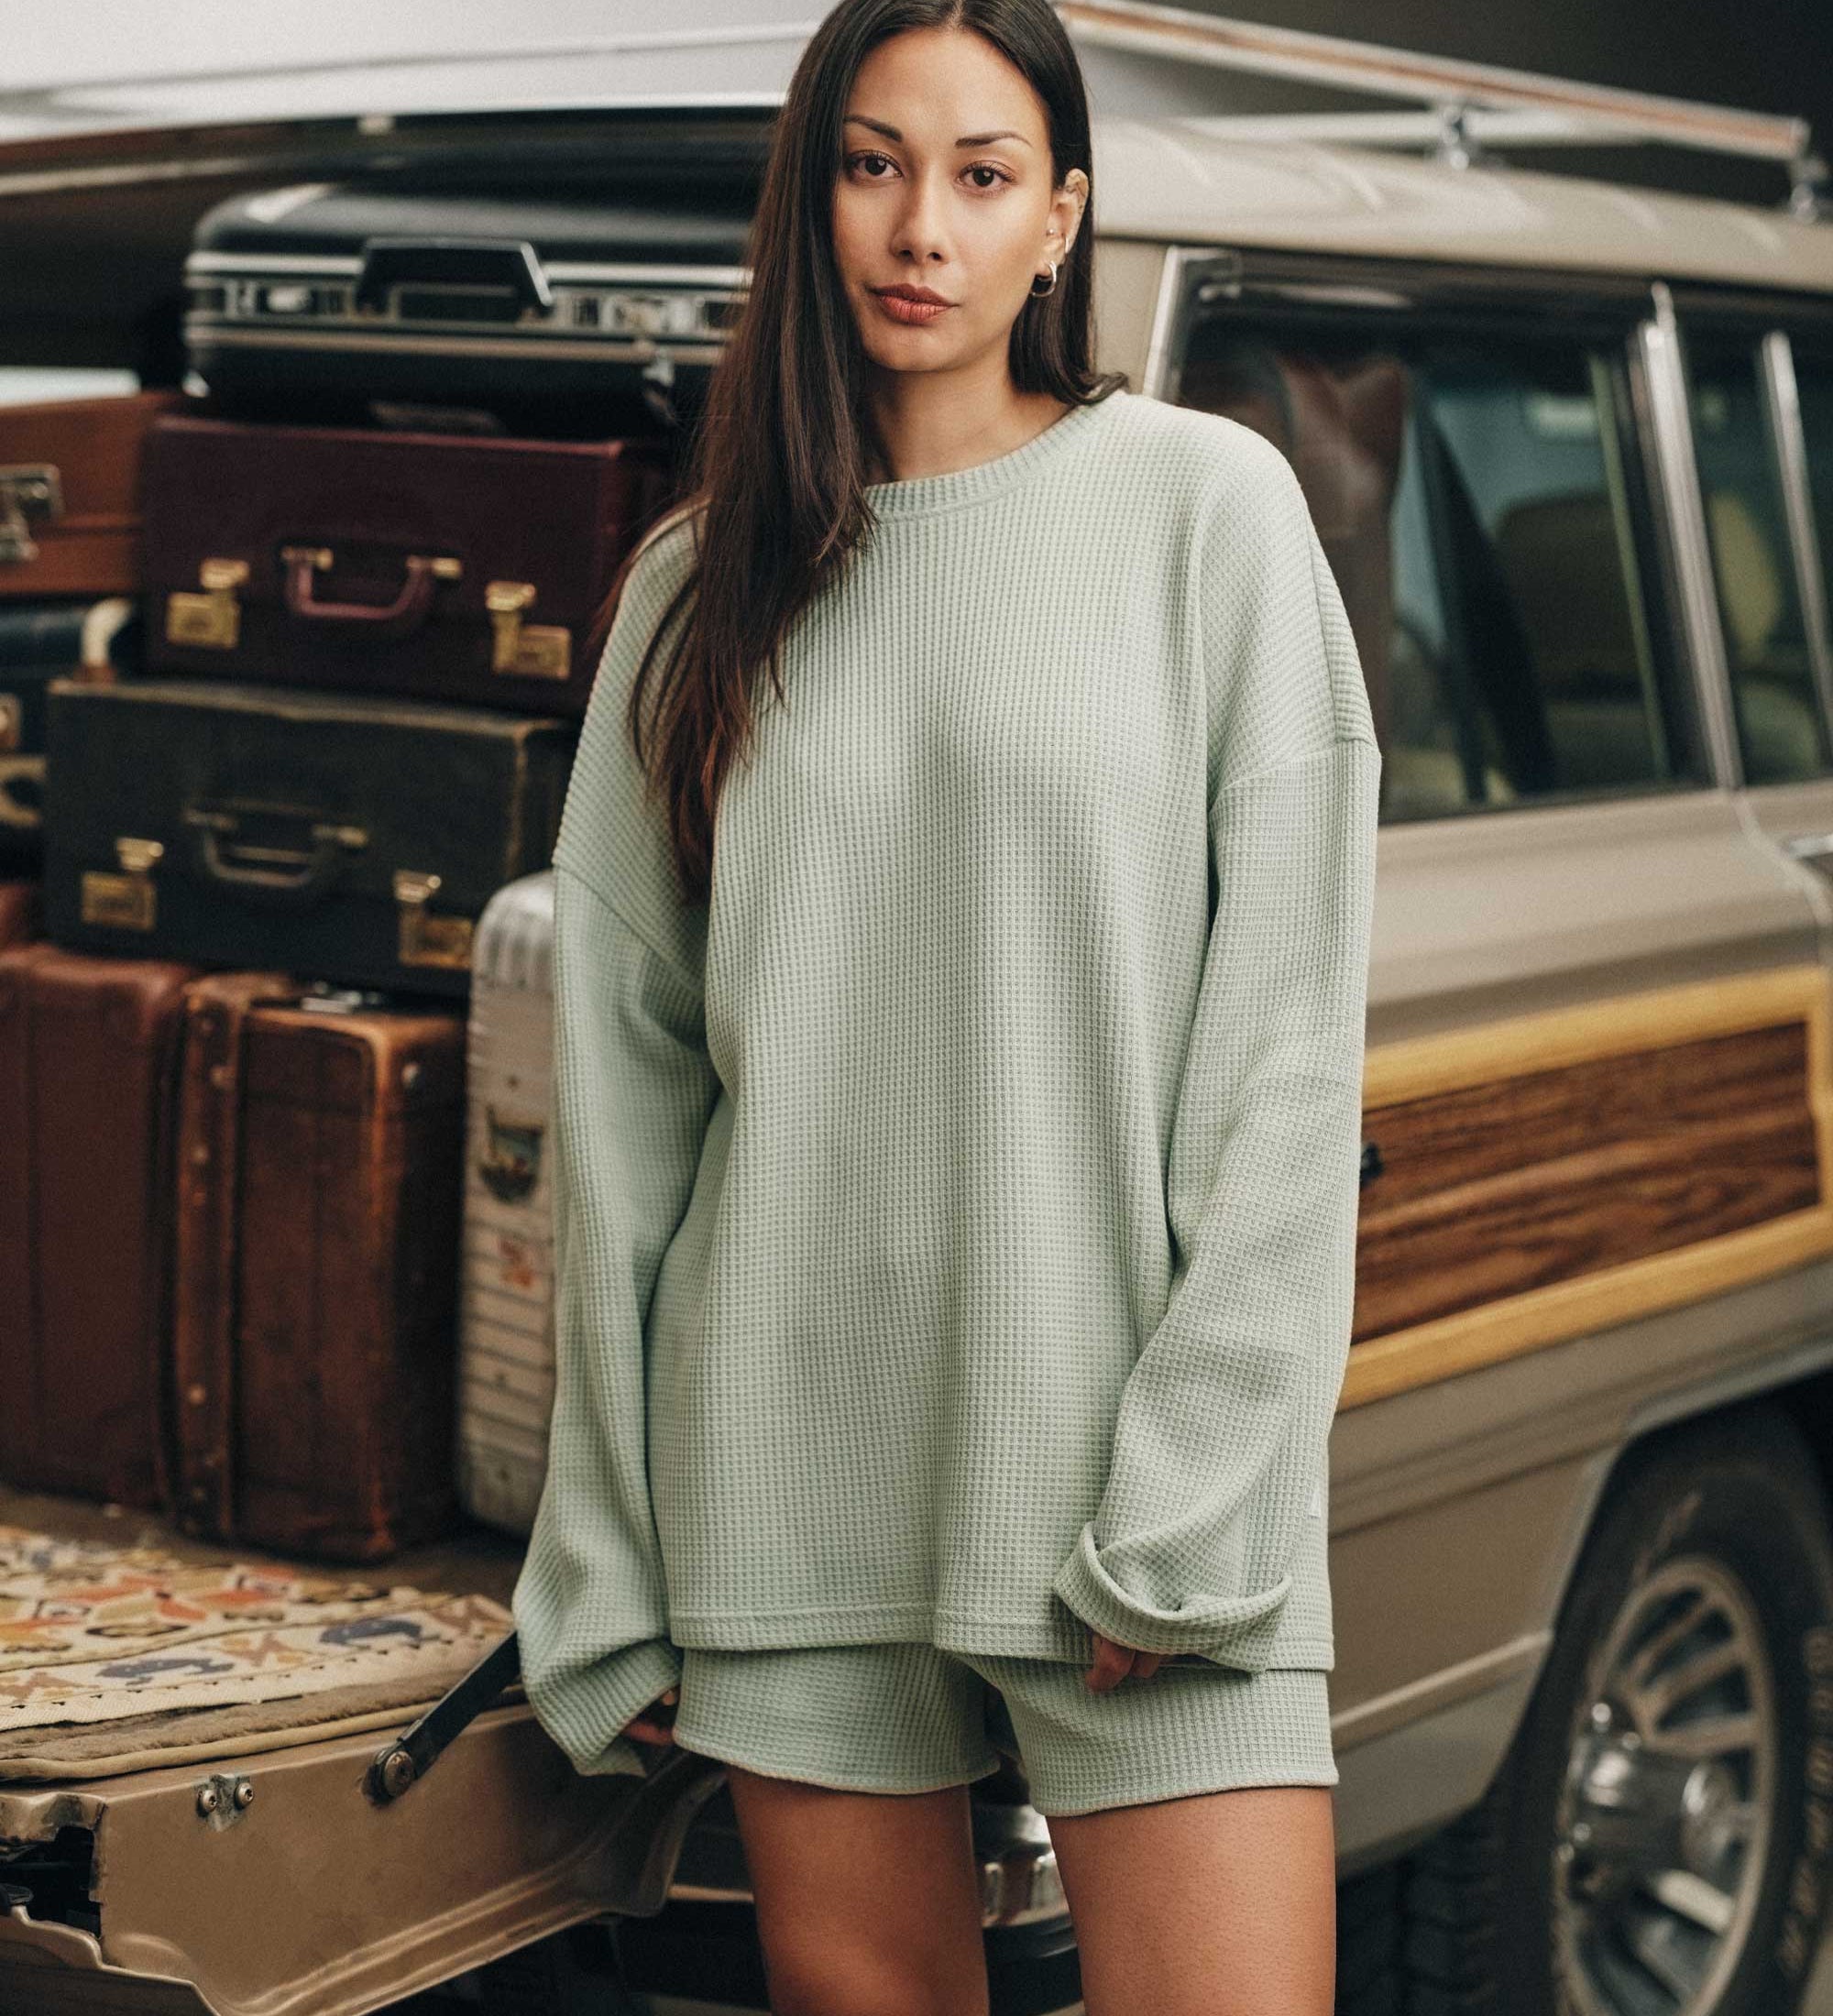 Female model wearing mint green waffle-patterned sweatshirt with a stitched-on material label.